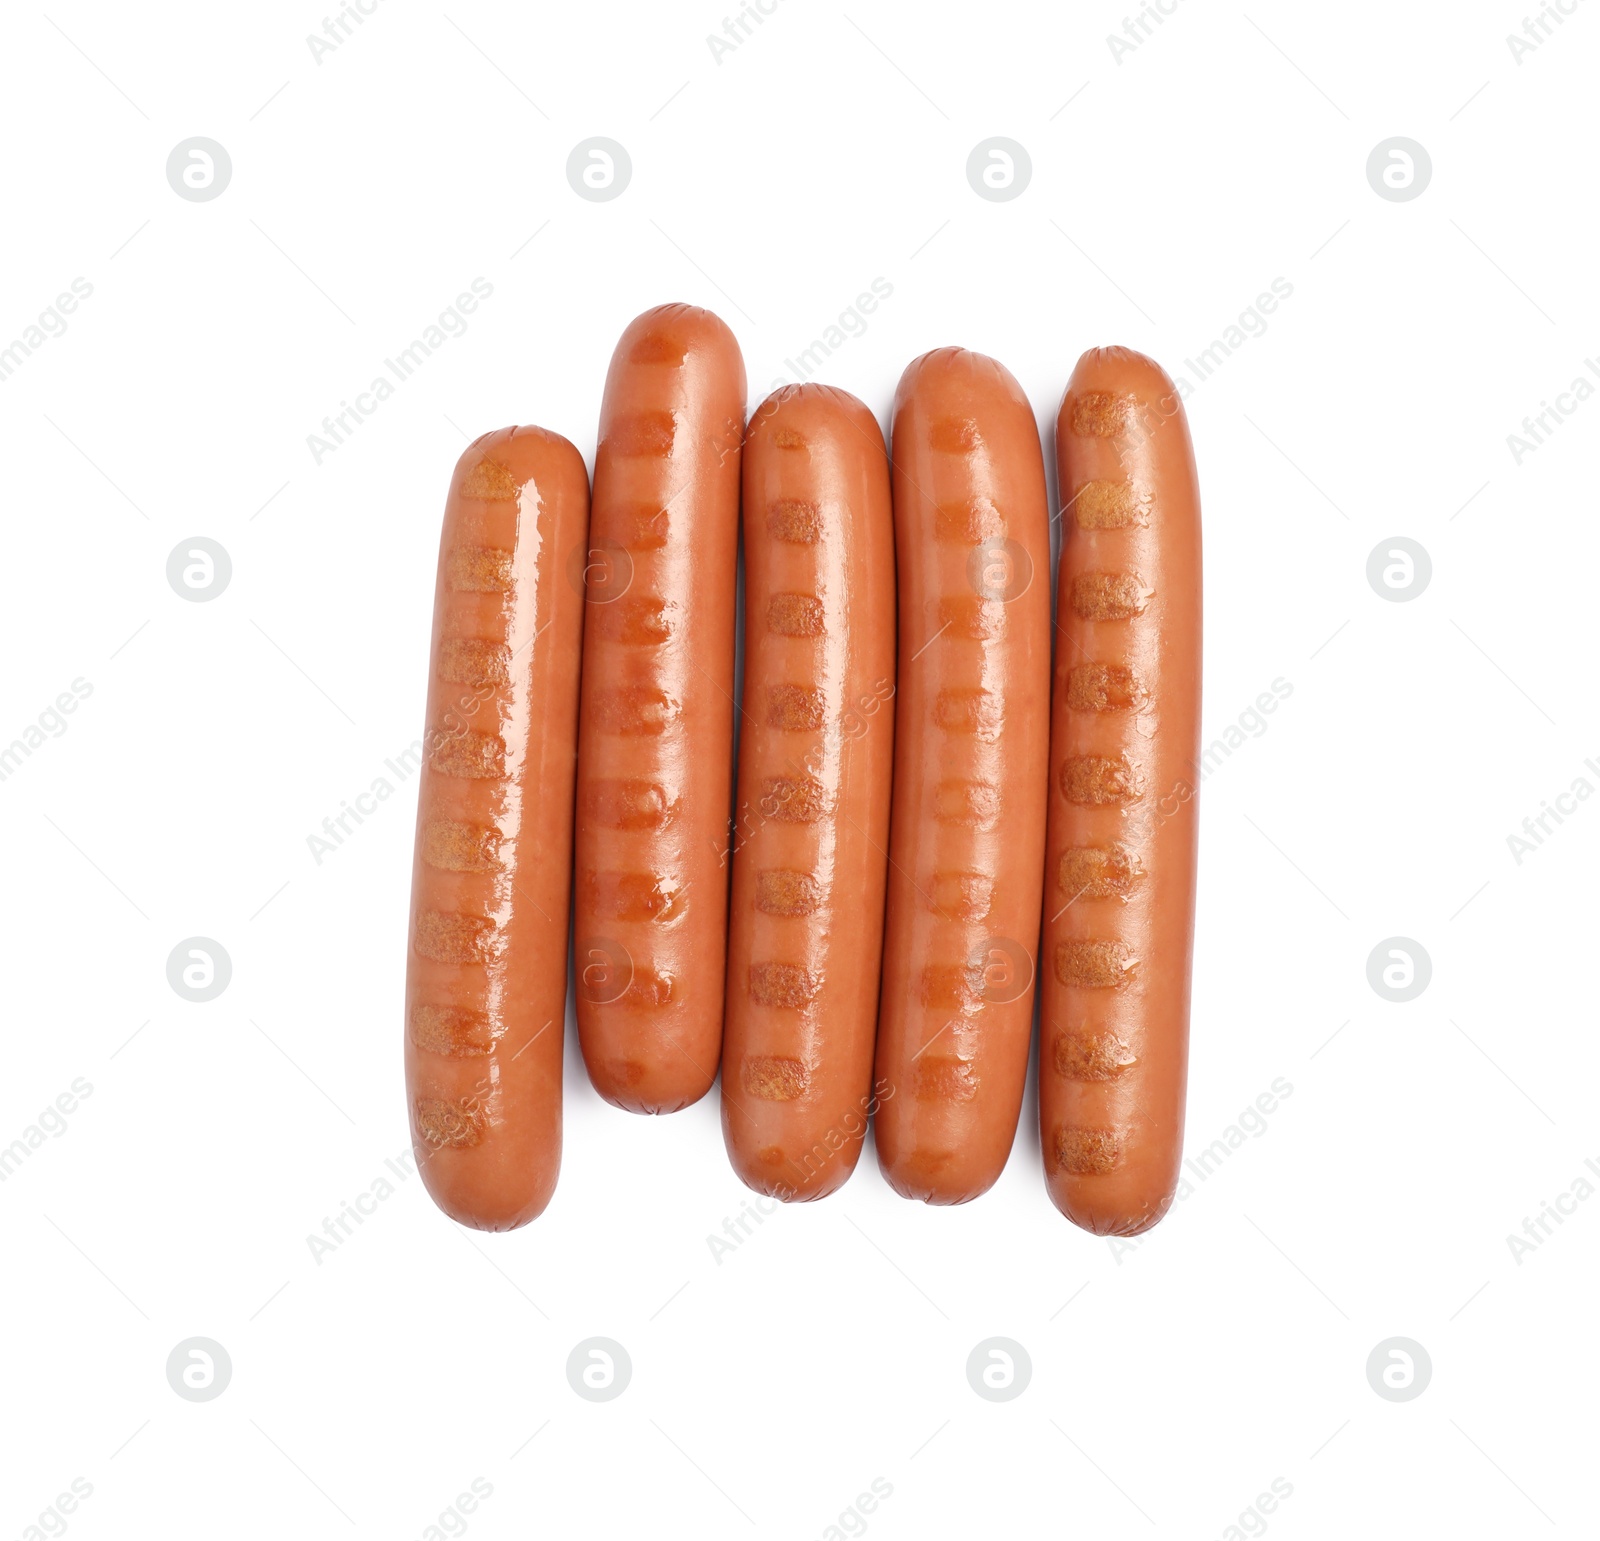 Photo of Tasty grilled sausages on white background, top view. Ingredients for hot dogs